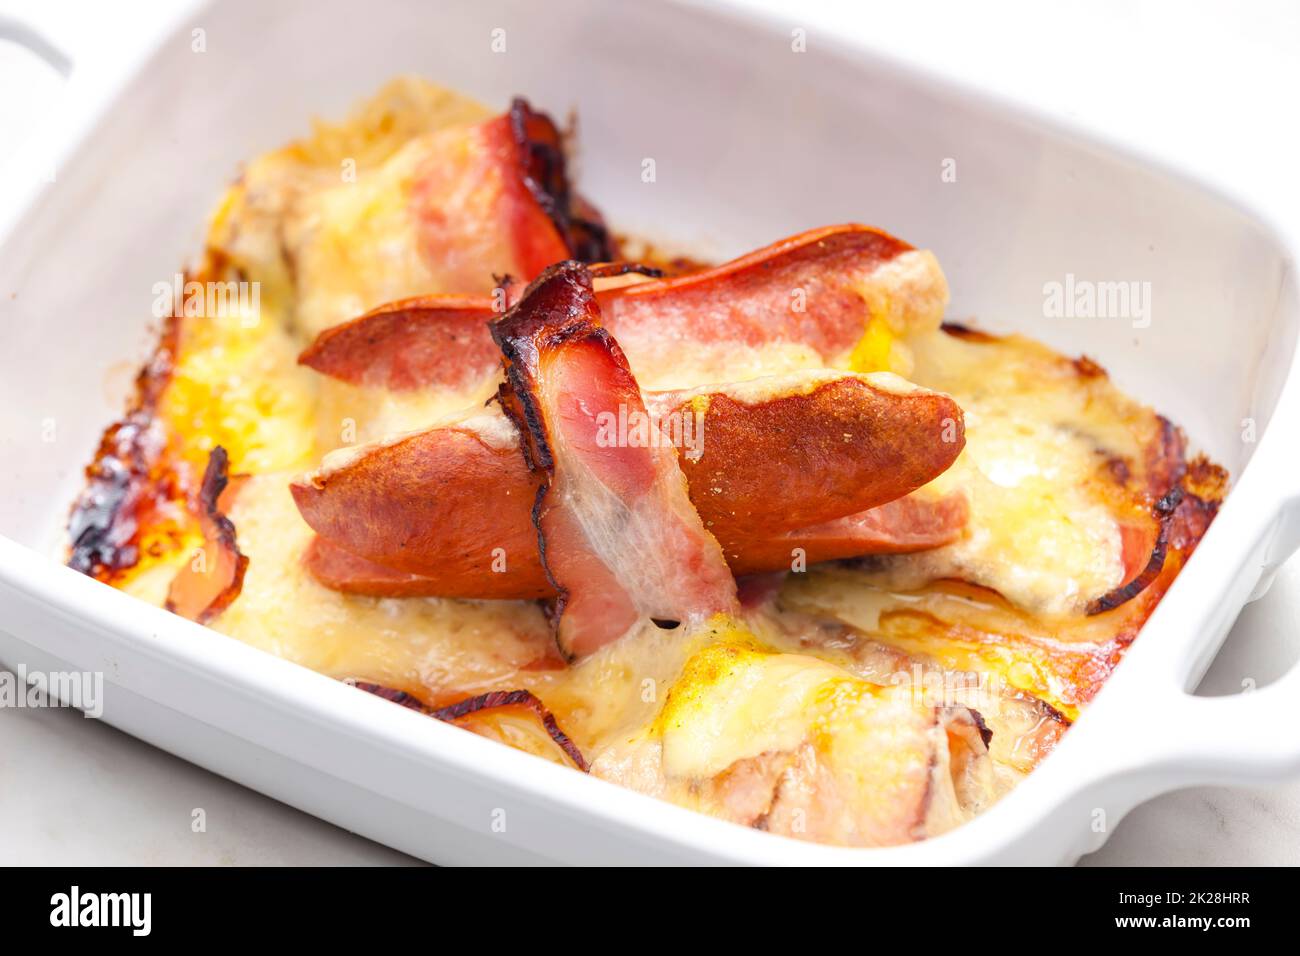 wurst in bacon baked with chedar cheese Stock Photo